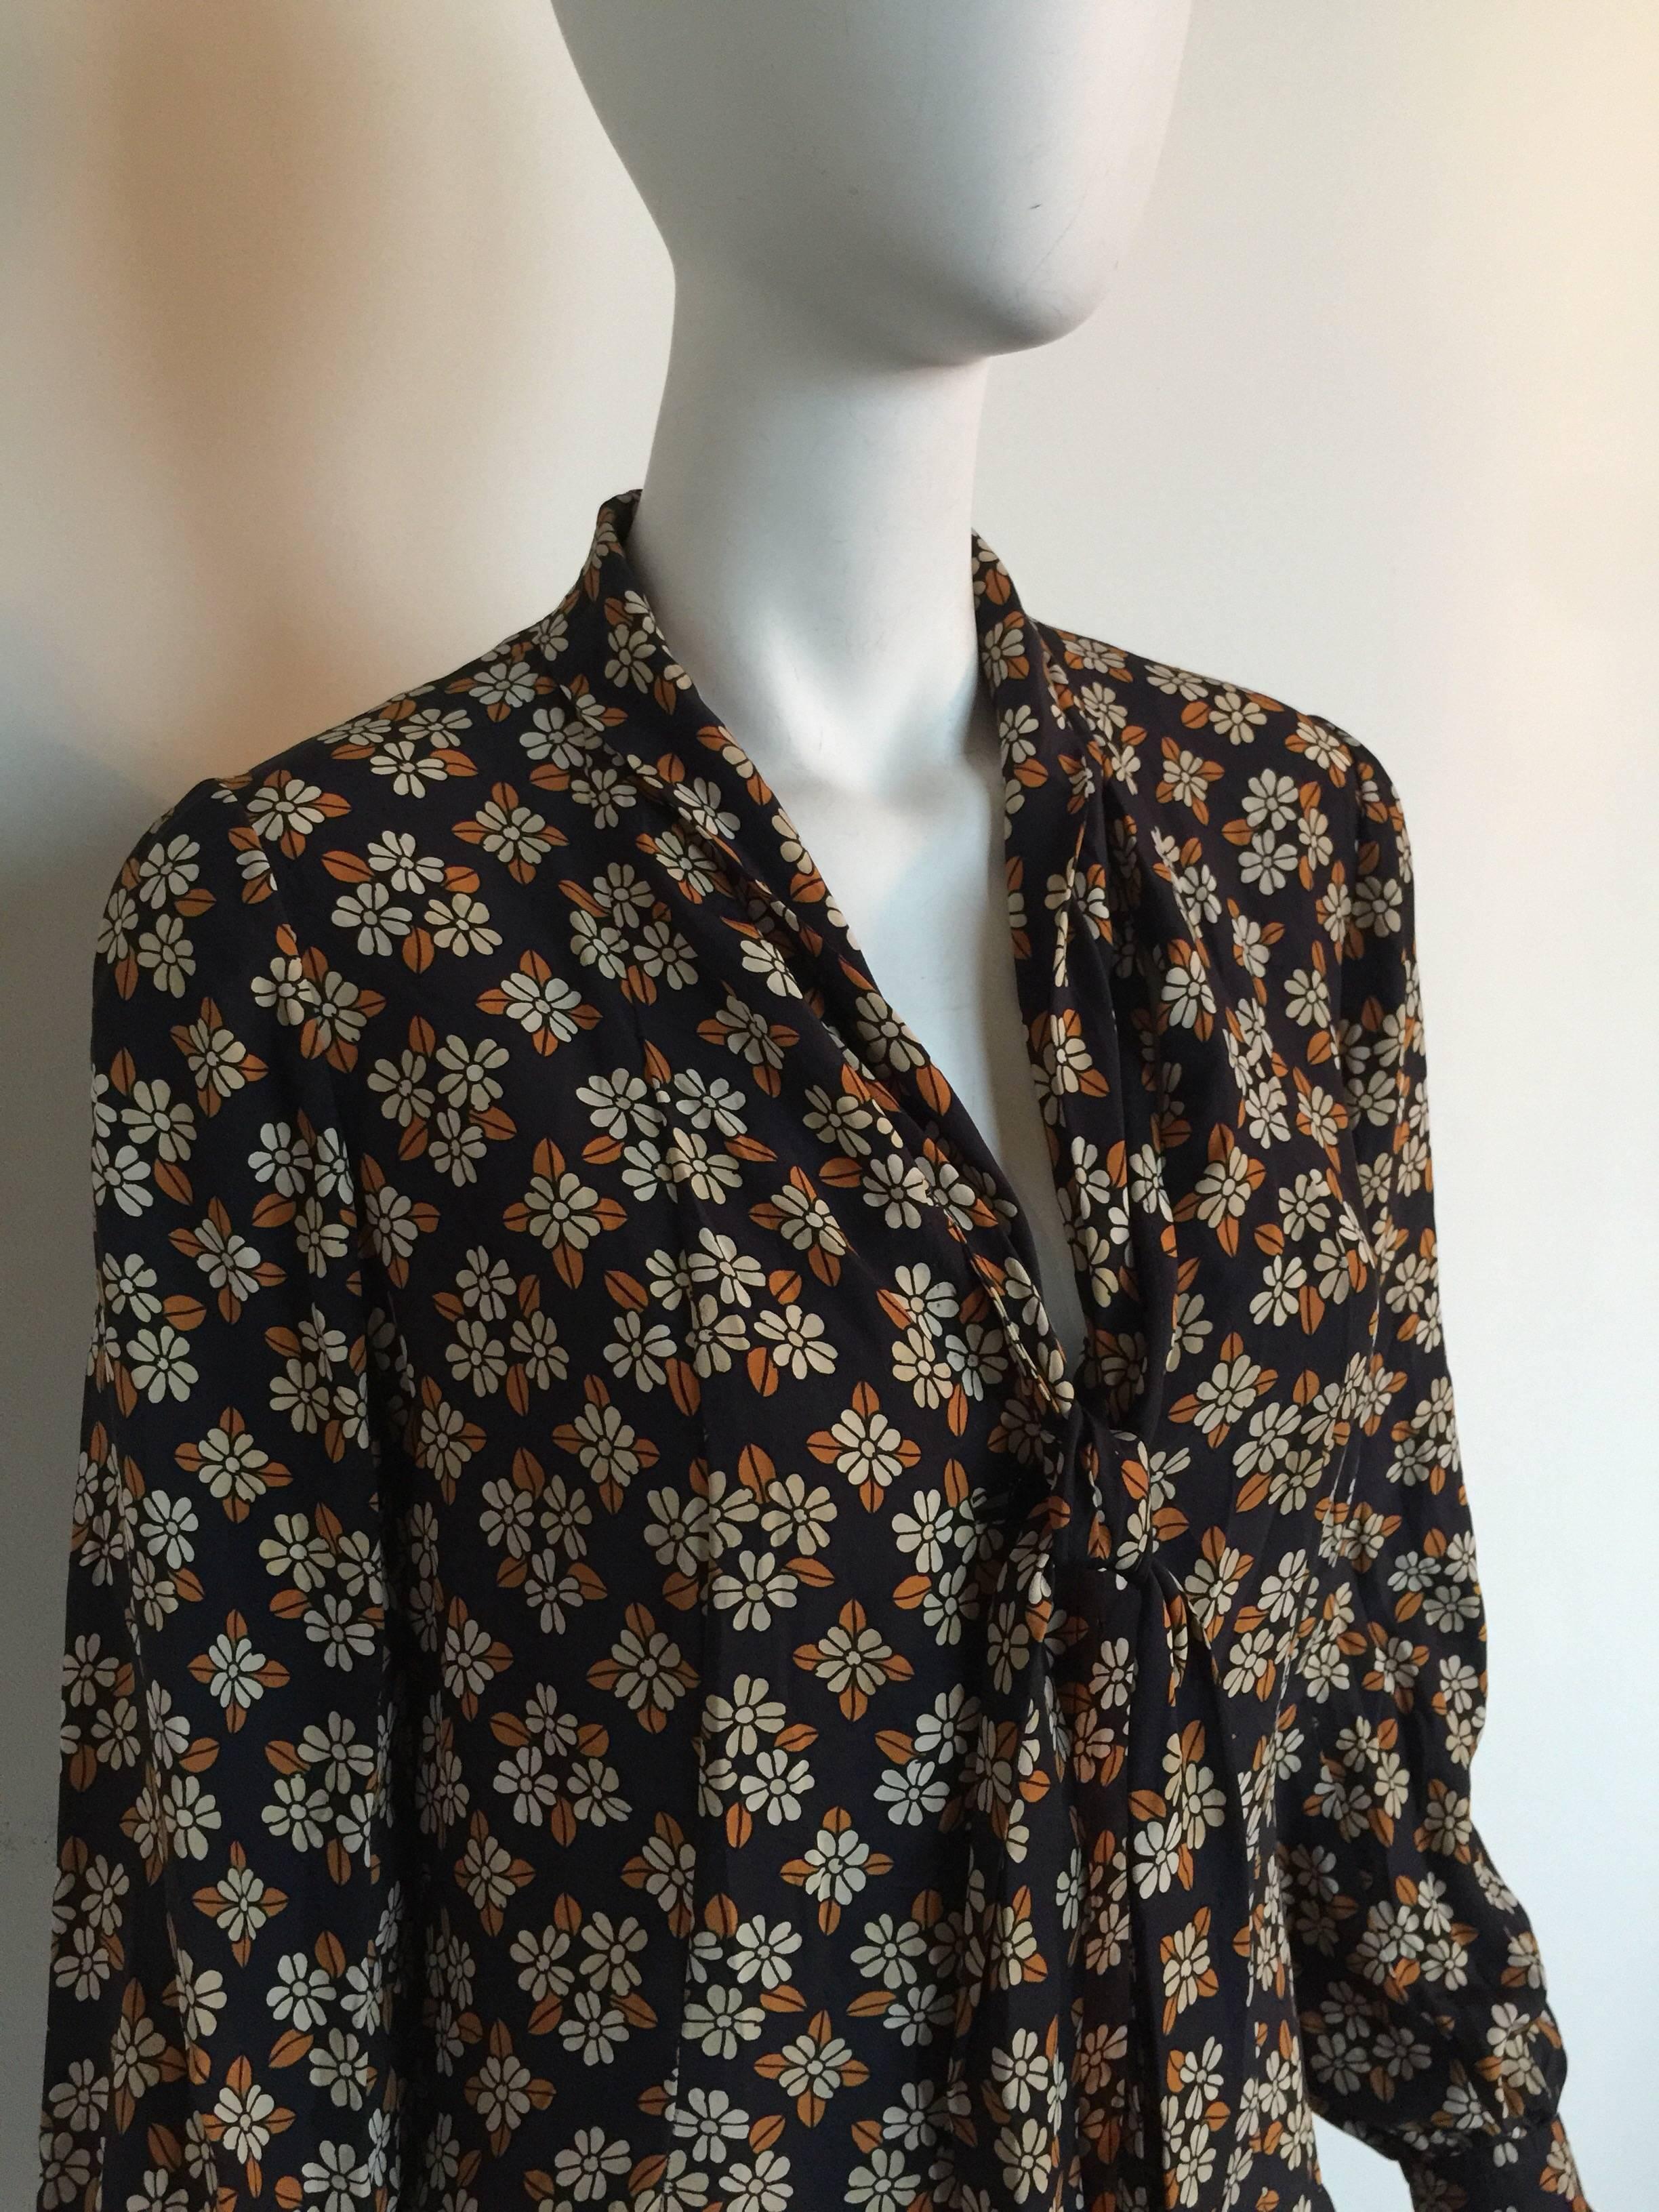 This 1970s Emanuel Ungaro Parallele dress is silk print with a drop waist and a pleated skirt.  The top half is button down the middle.  